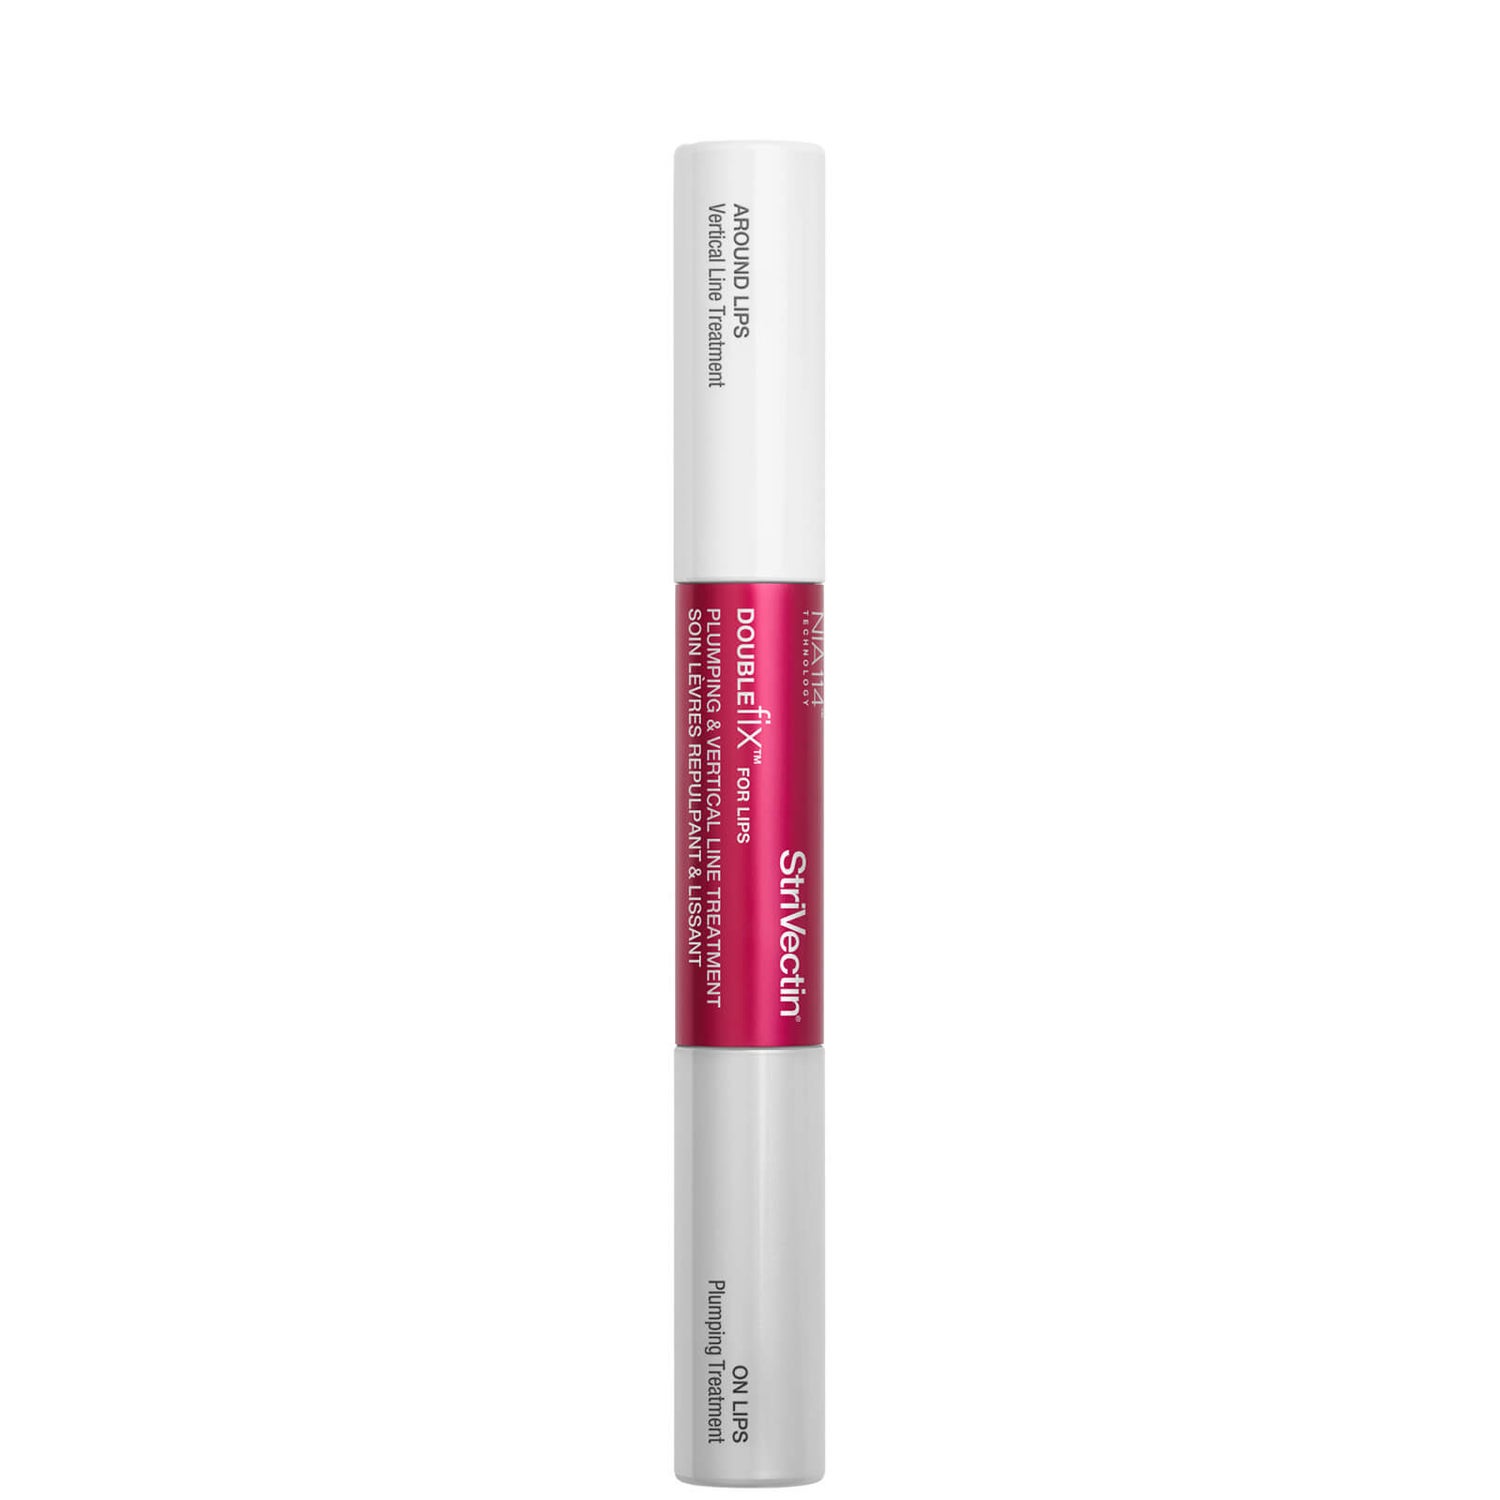 StriVectin Double Fix for Lips Plumping Vertical Line Treatment (0.16 fl. oz.)